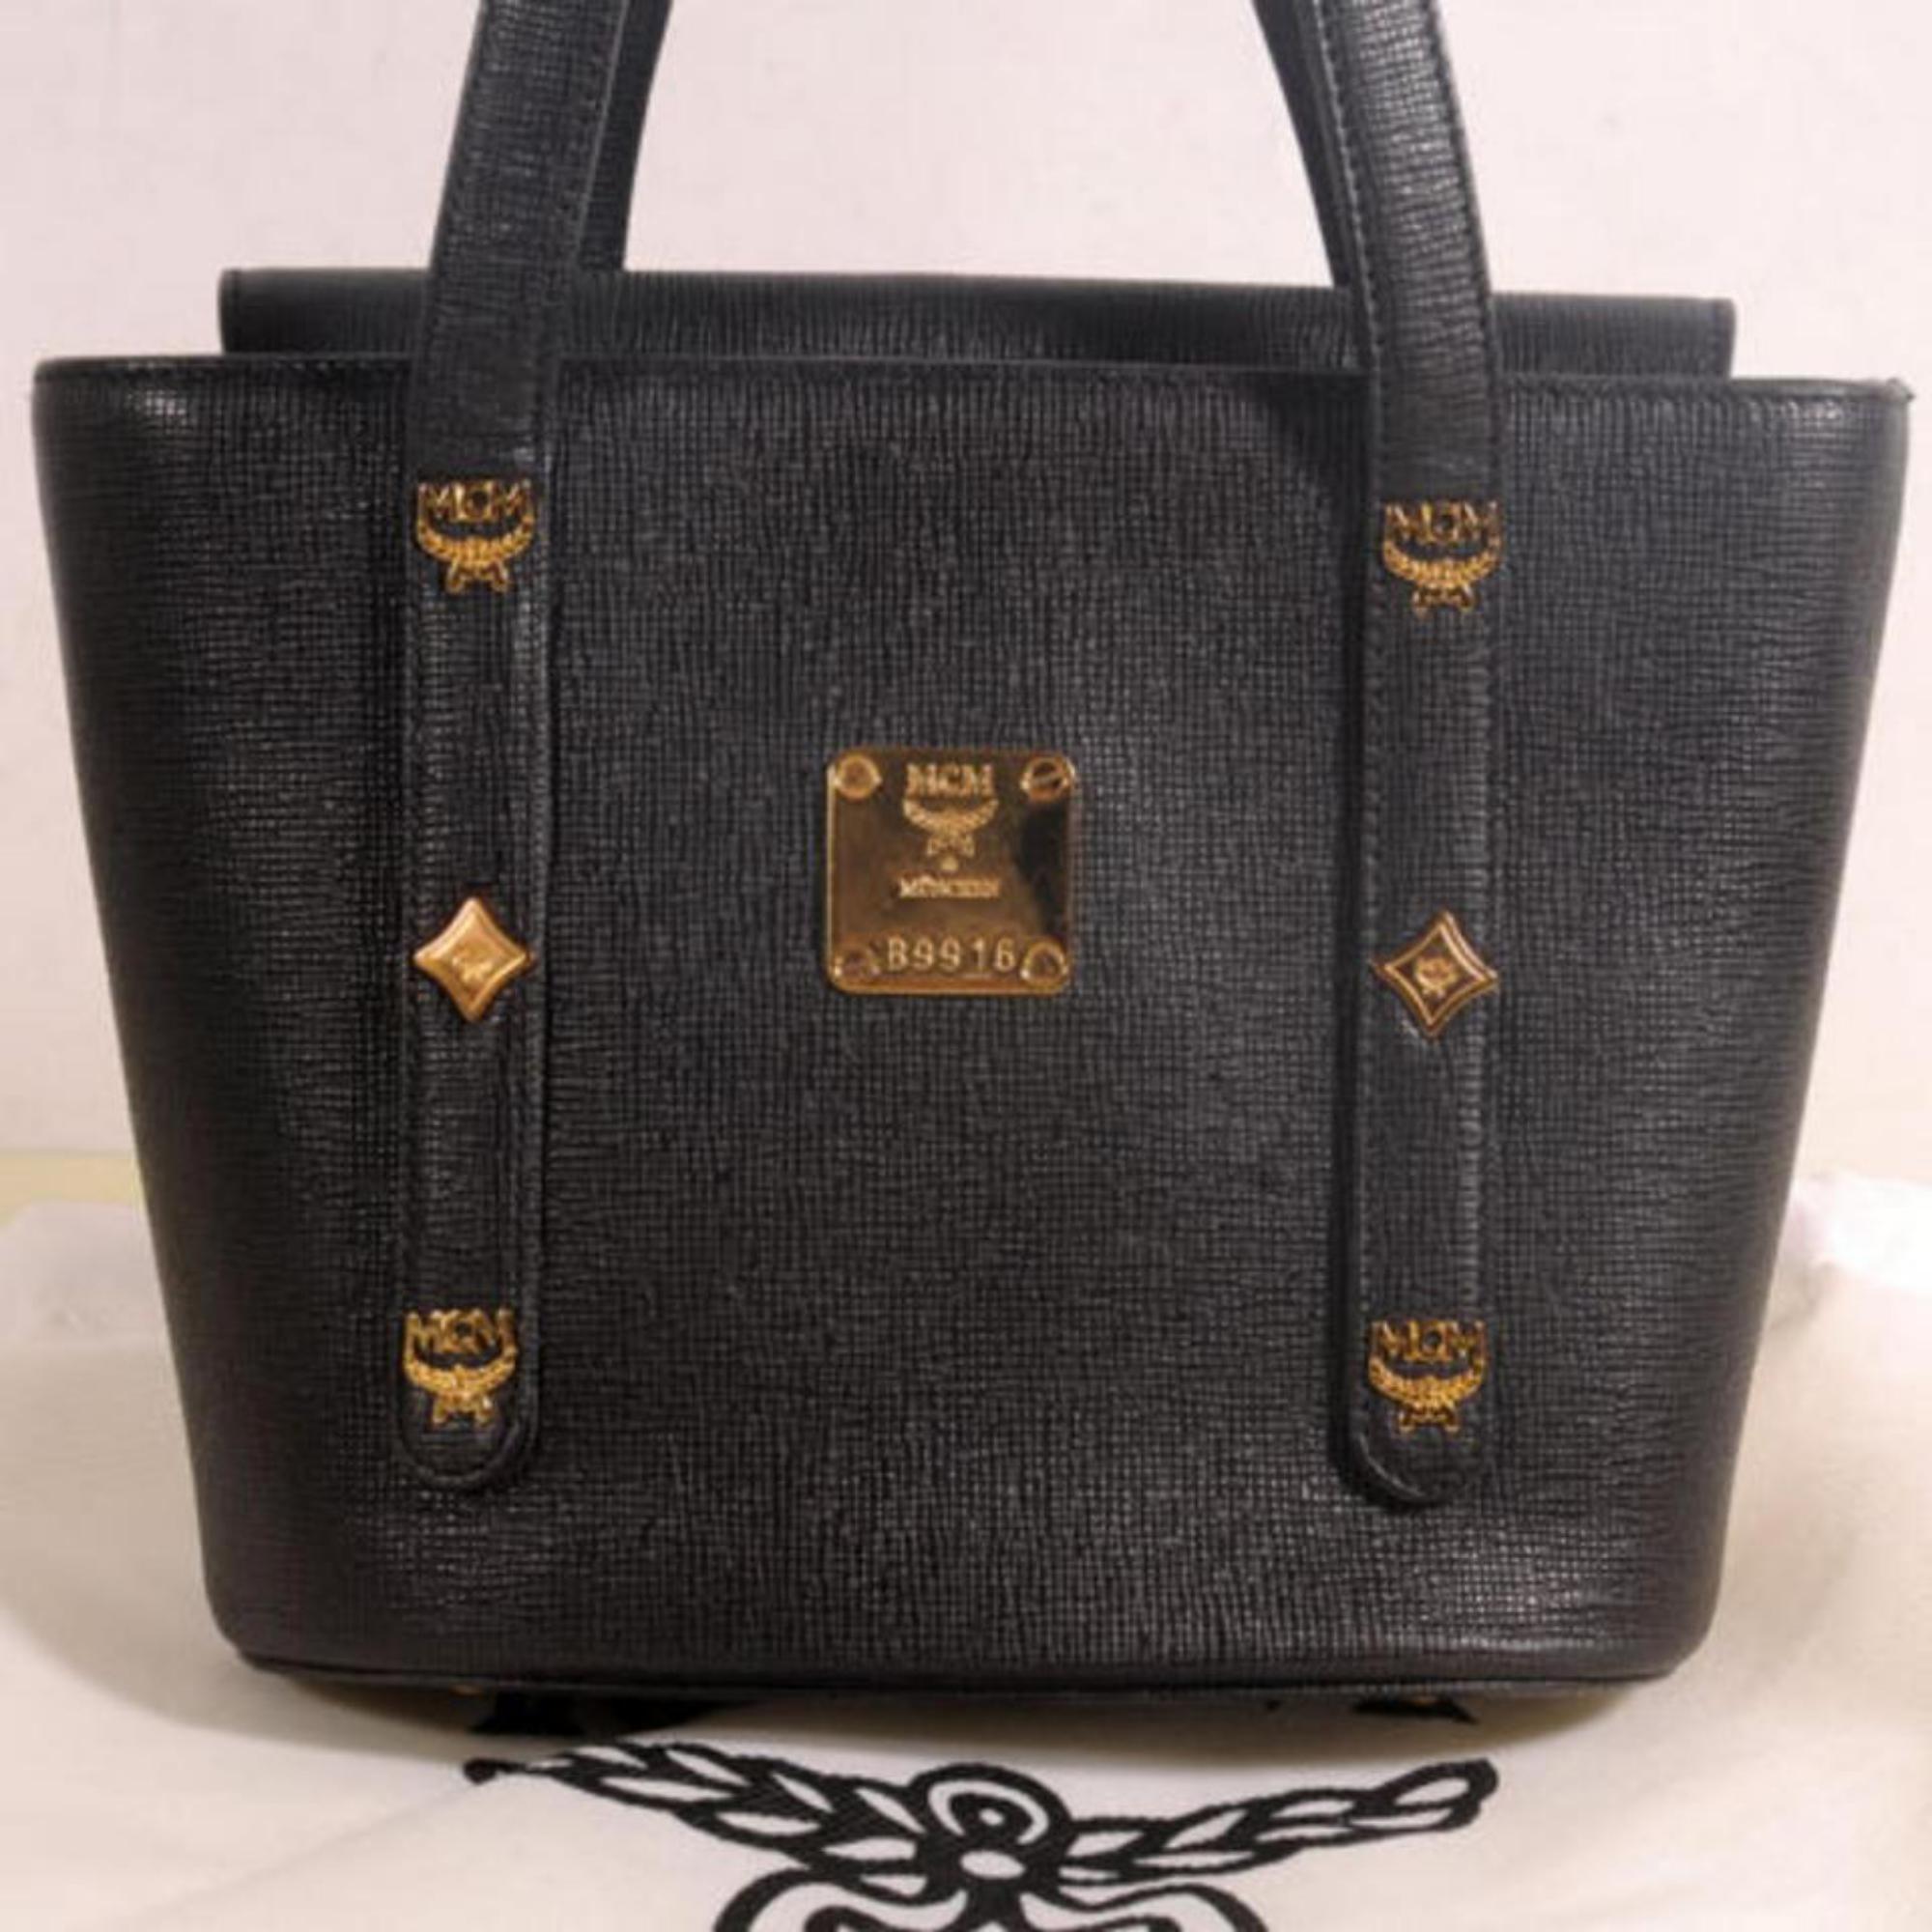 MCM Studded Bucket 869501 Black Leather Tote In Good Condition For Sale In Forest Hills, NY